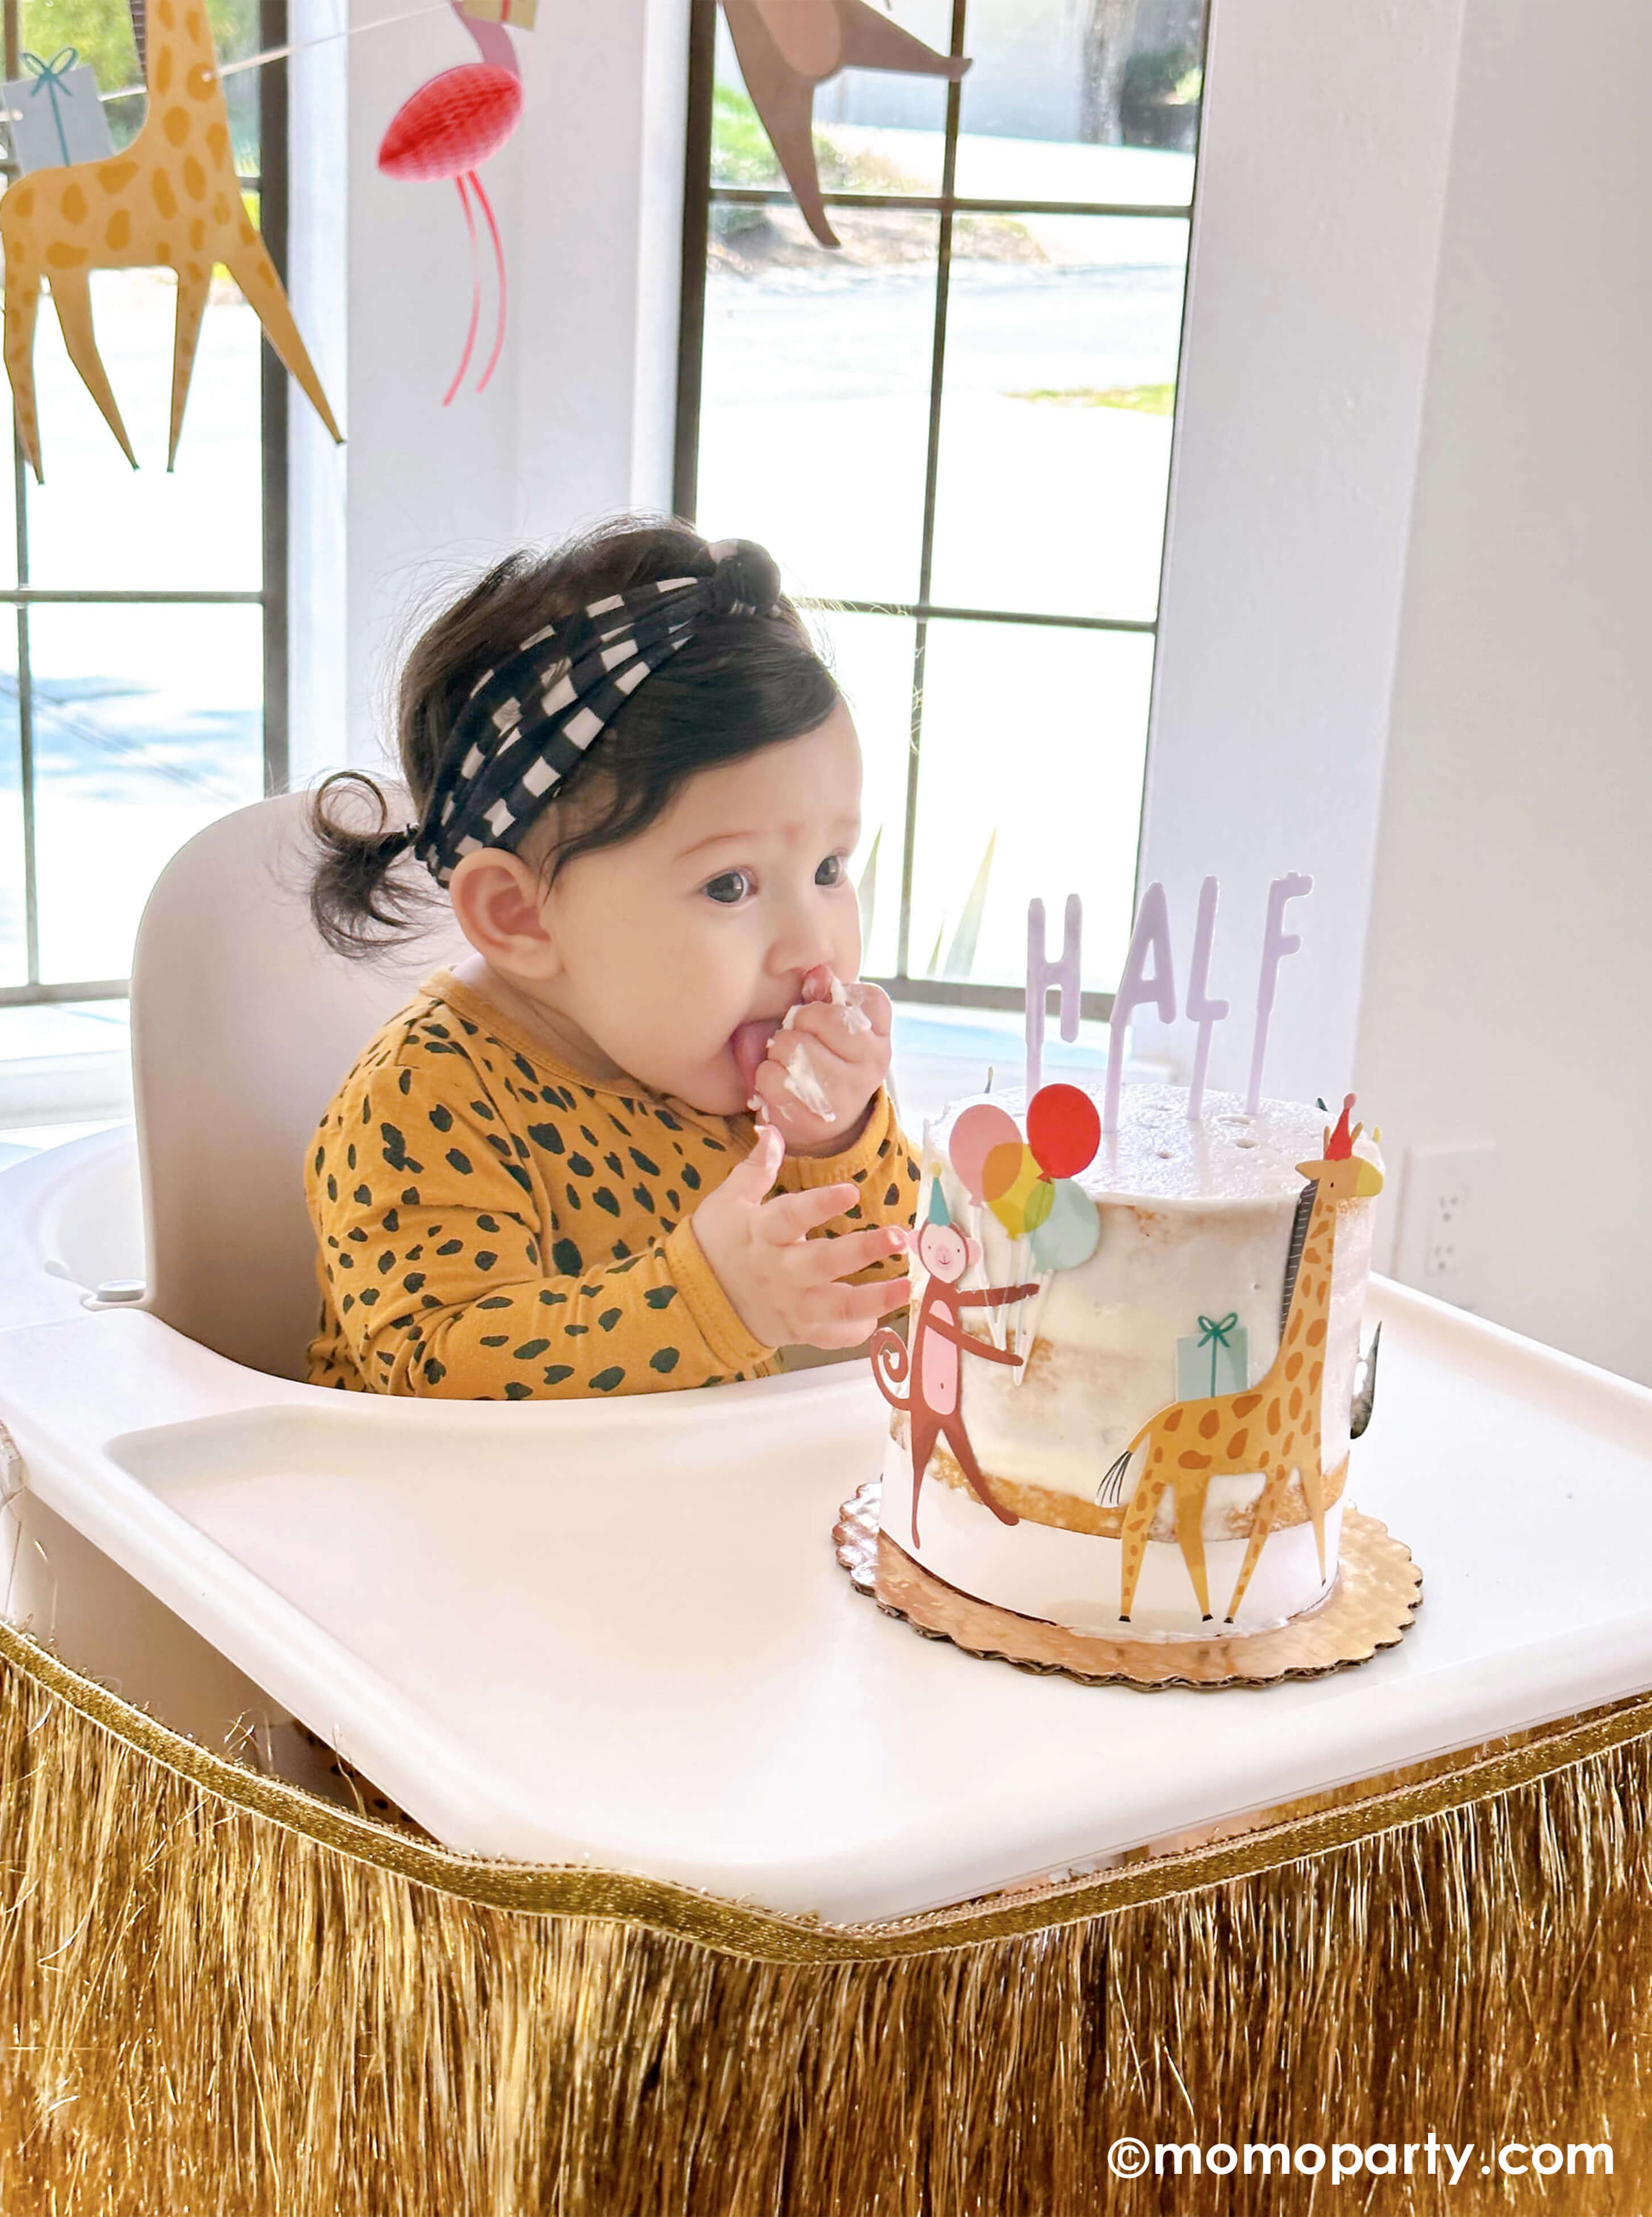  A cute baby girl wearing animal pattern onesie, sitting on a highchair in her 6 months animal themed half birthday party, eating her Naked Cake decorated with Meri Meri Animal Parade Cake Wrap & Toppers, and on the top spelling "HALF" with Cake By Courtney Letter-board Cake Toppers, repersend for a six months half birthday, along with Meri Meri gold fringe garland around the highchair tray, it makes a great party inspiration for kid's animal, safari, carnival themed birthday party.